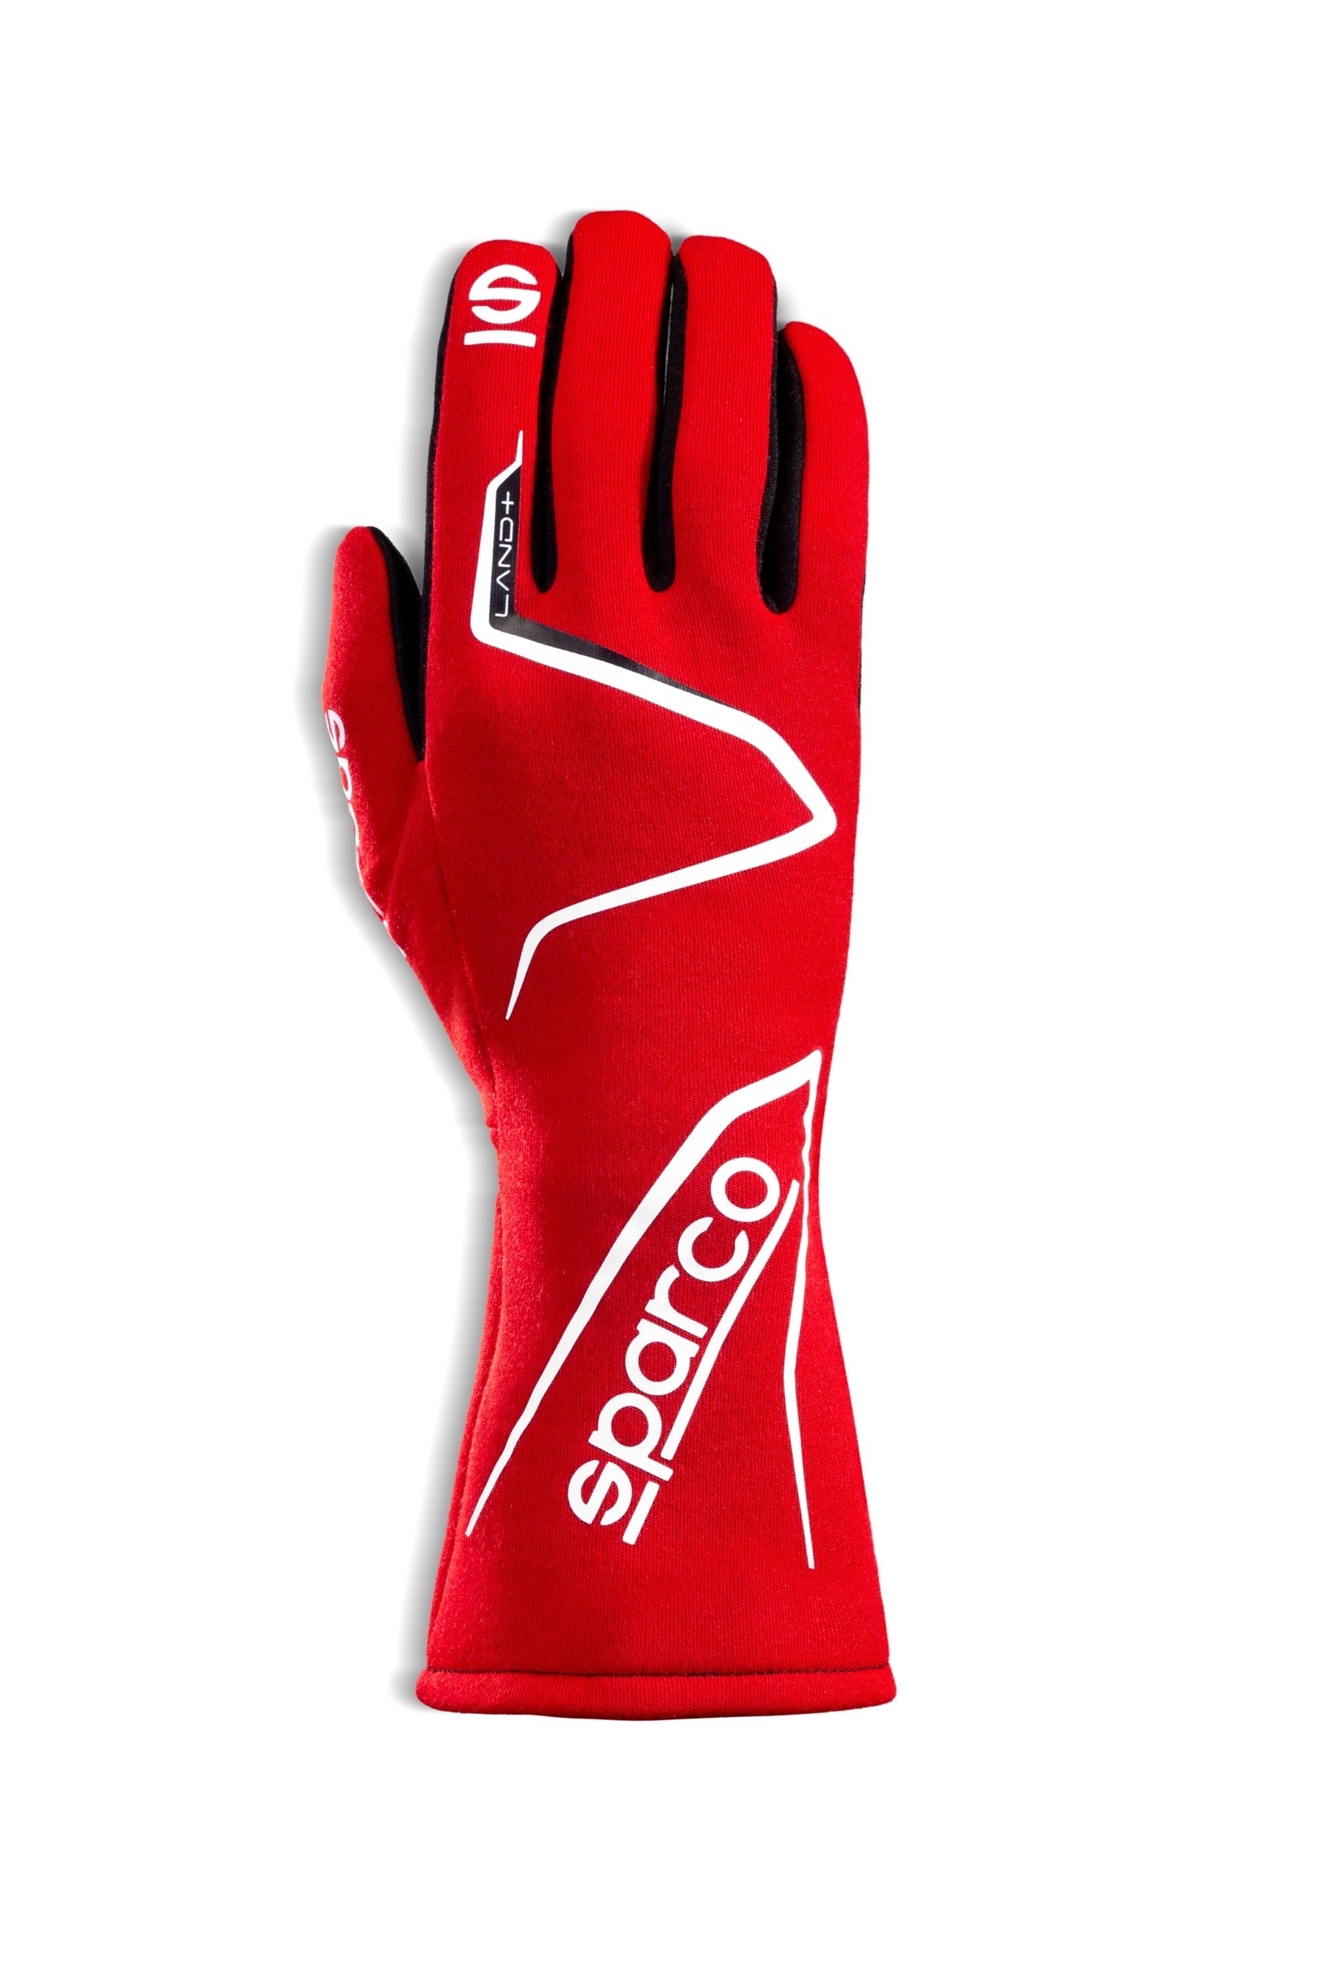 SPARCO Glove Arrow Large Black Red 00131411NRRS